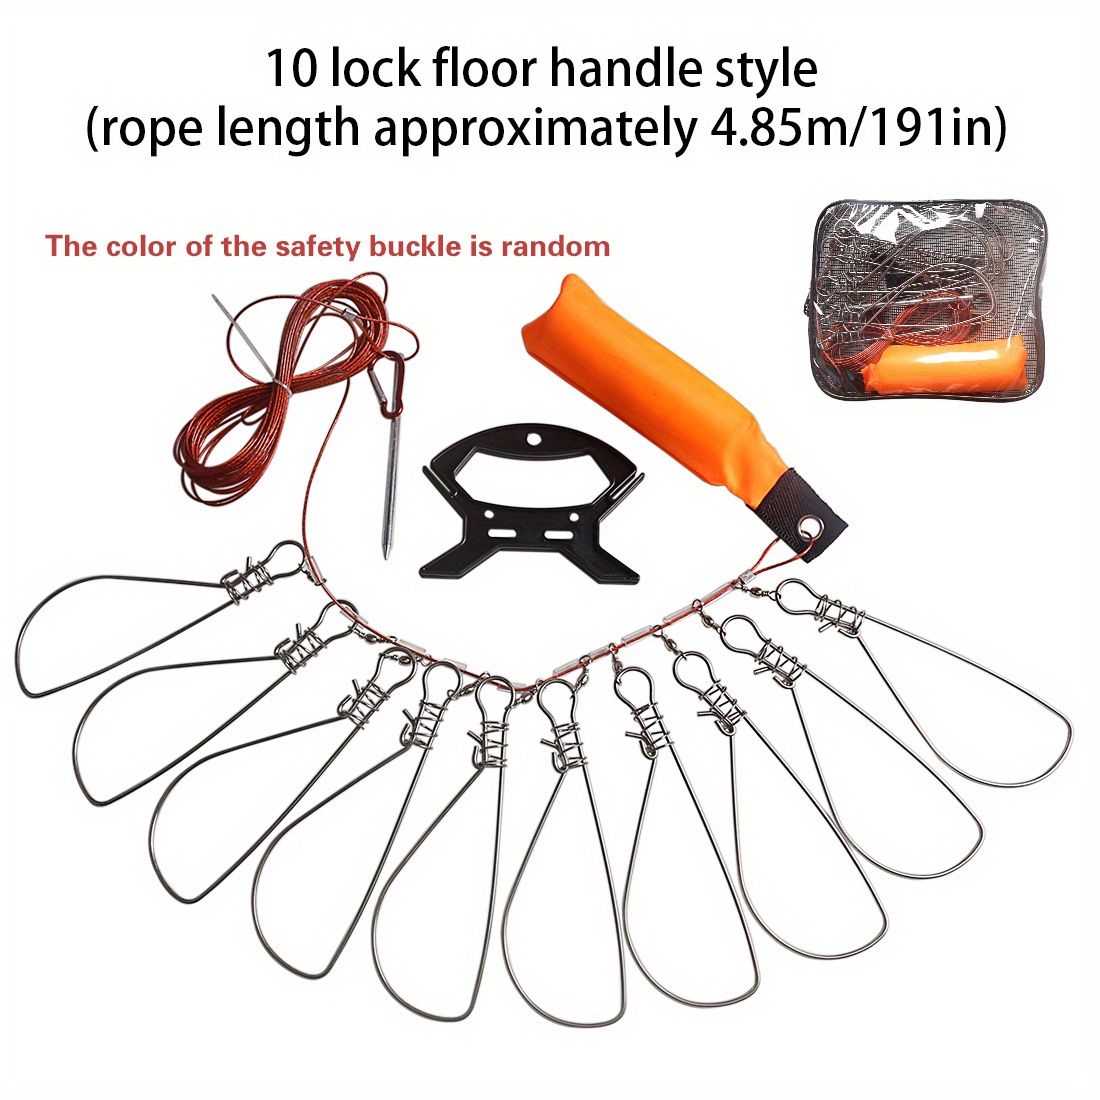 Fish Stringer- Heavy Duty Rope Stringer for Fishing with 10